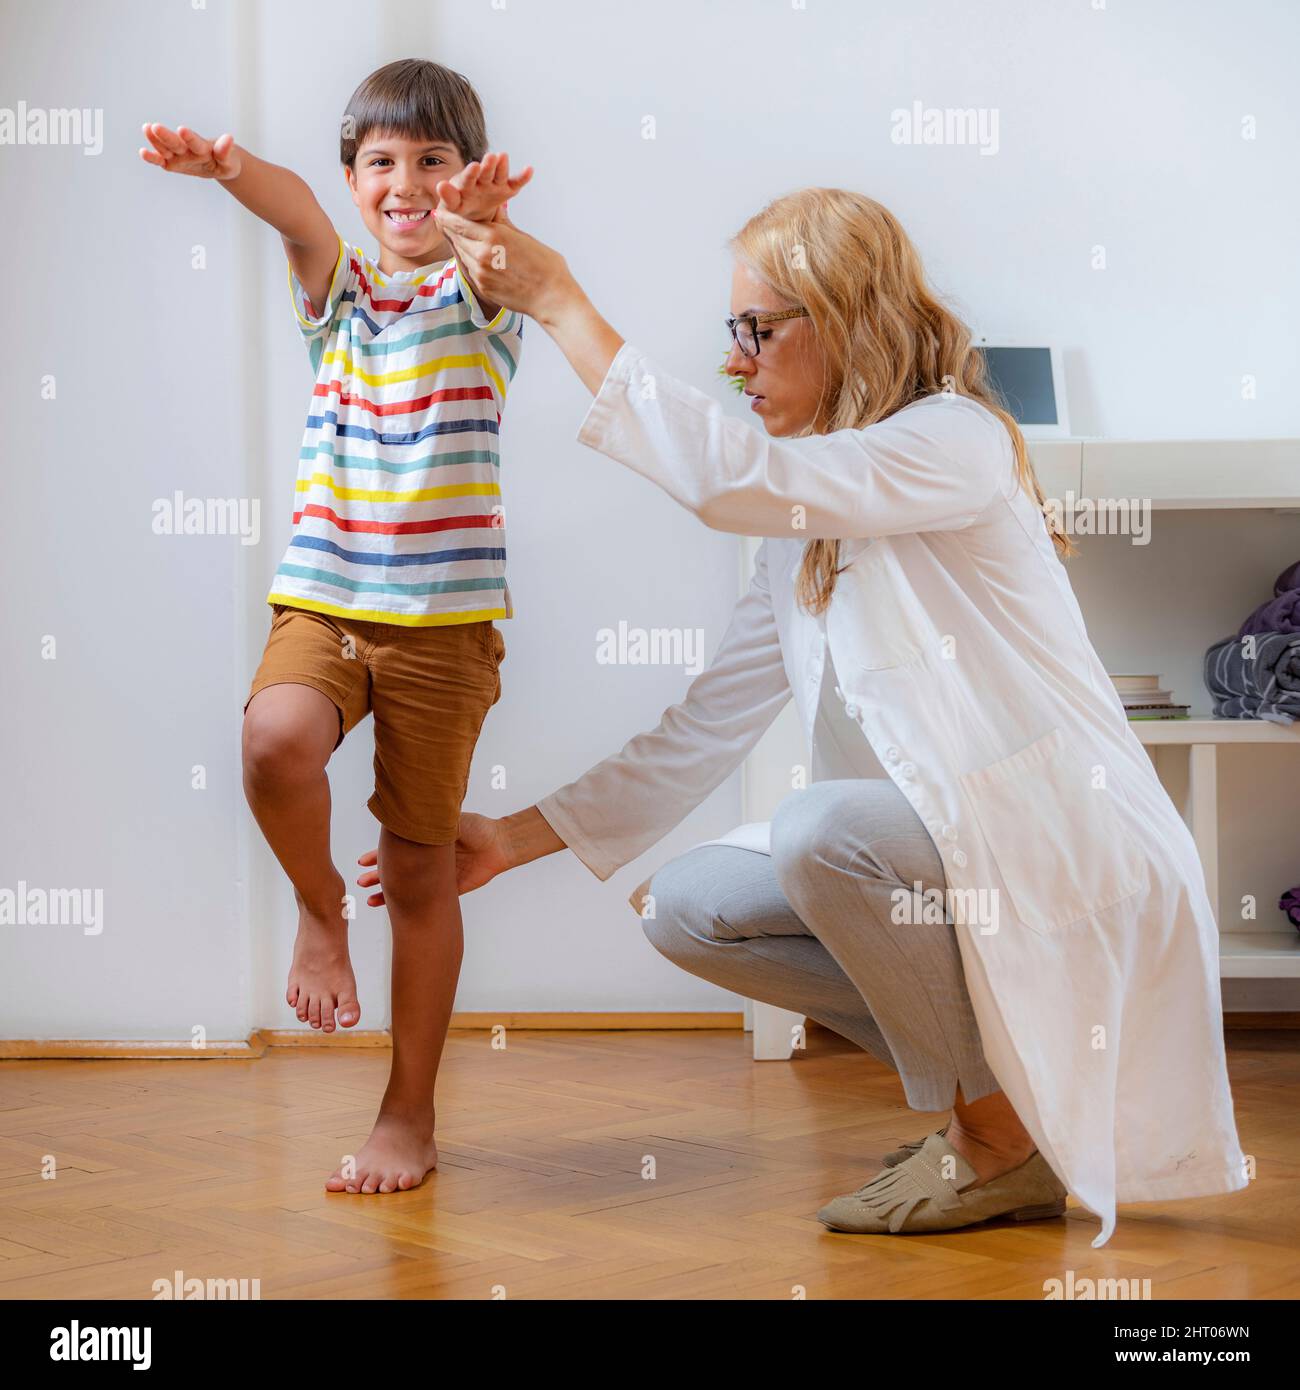 Physical therapist doing medical exam with a boy Stock Photo